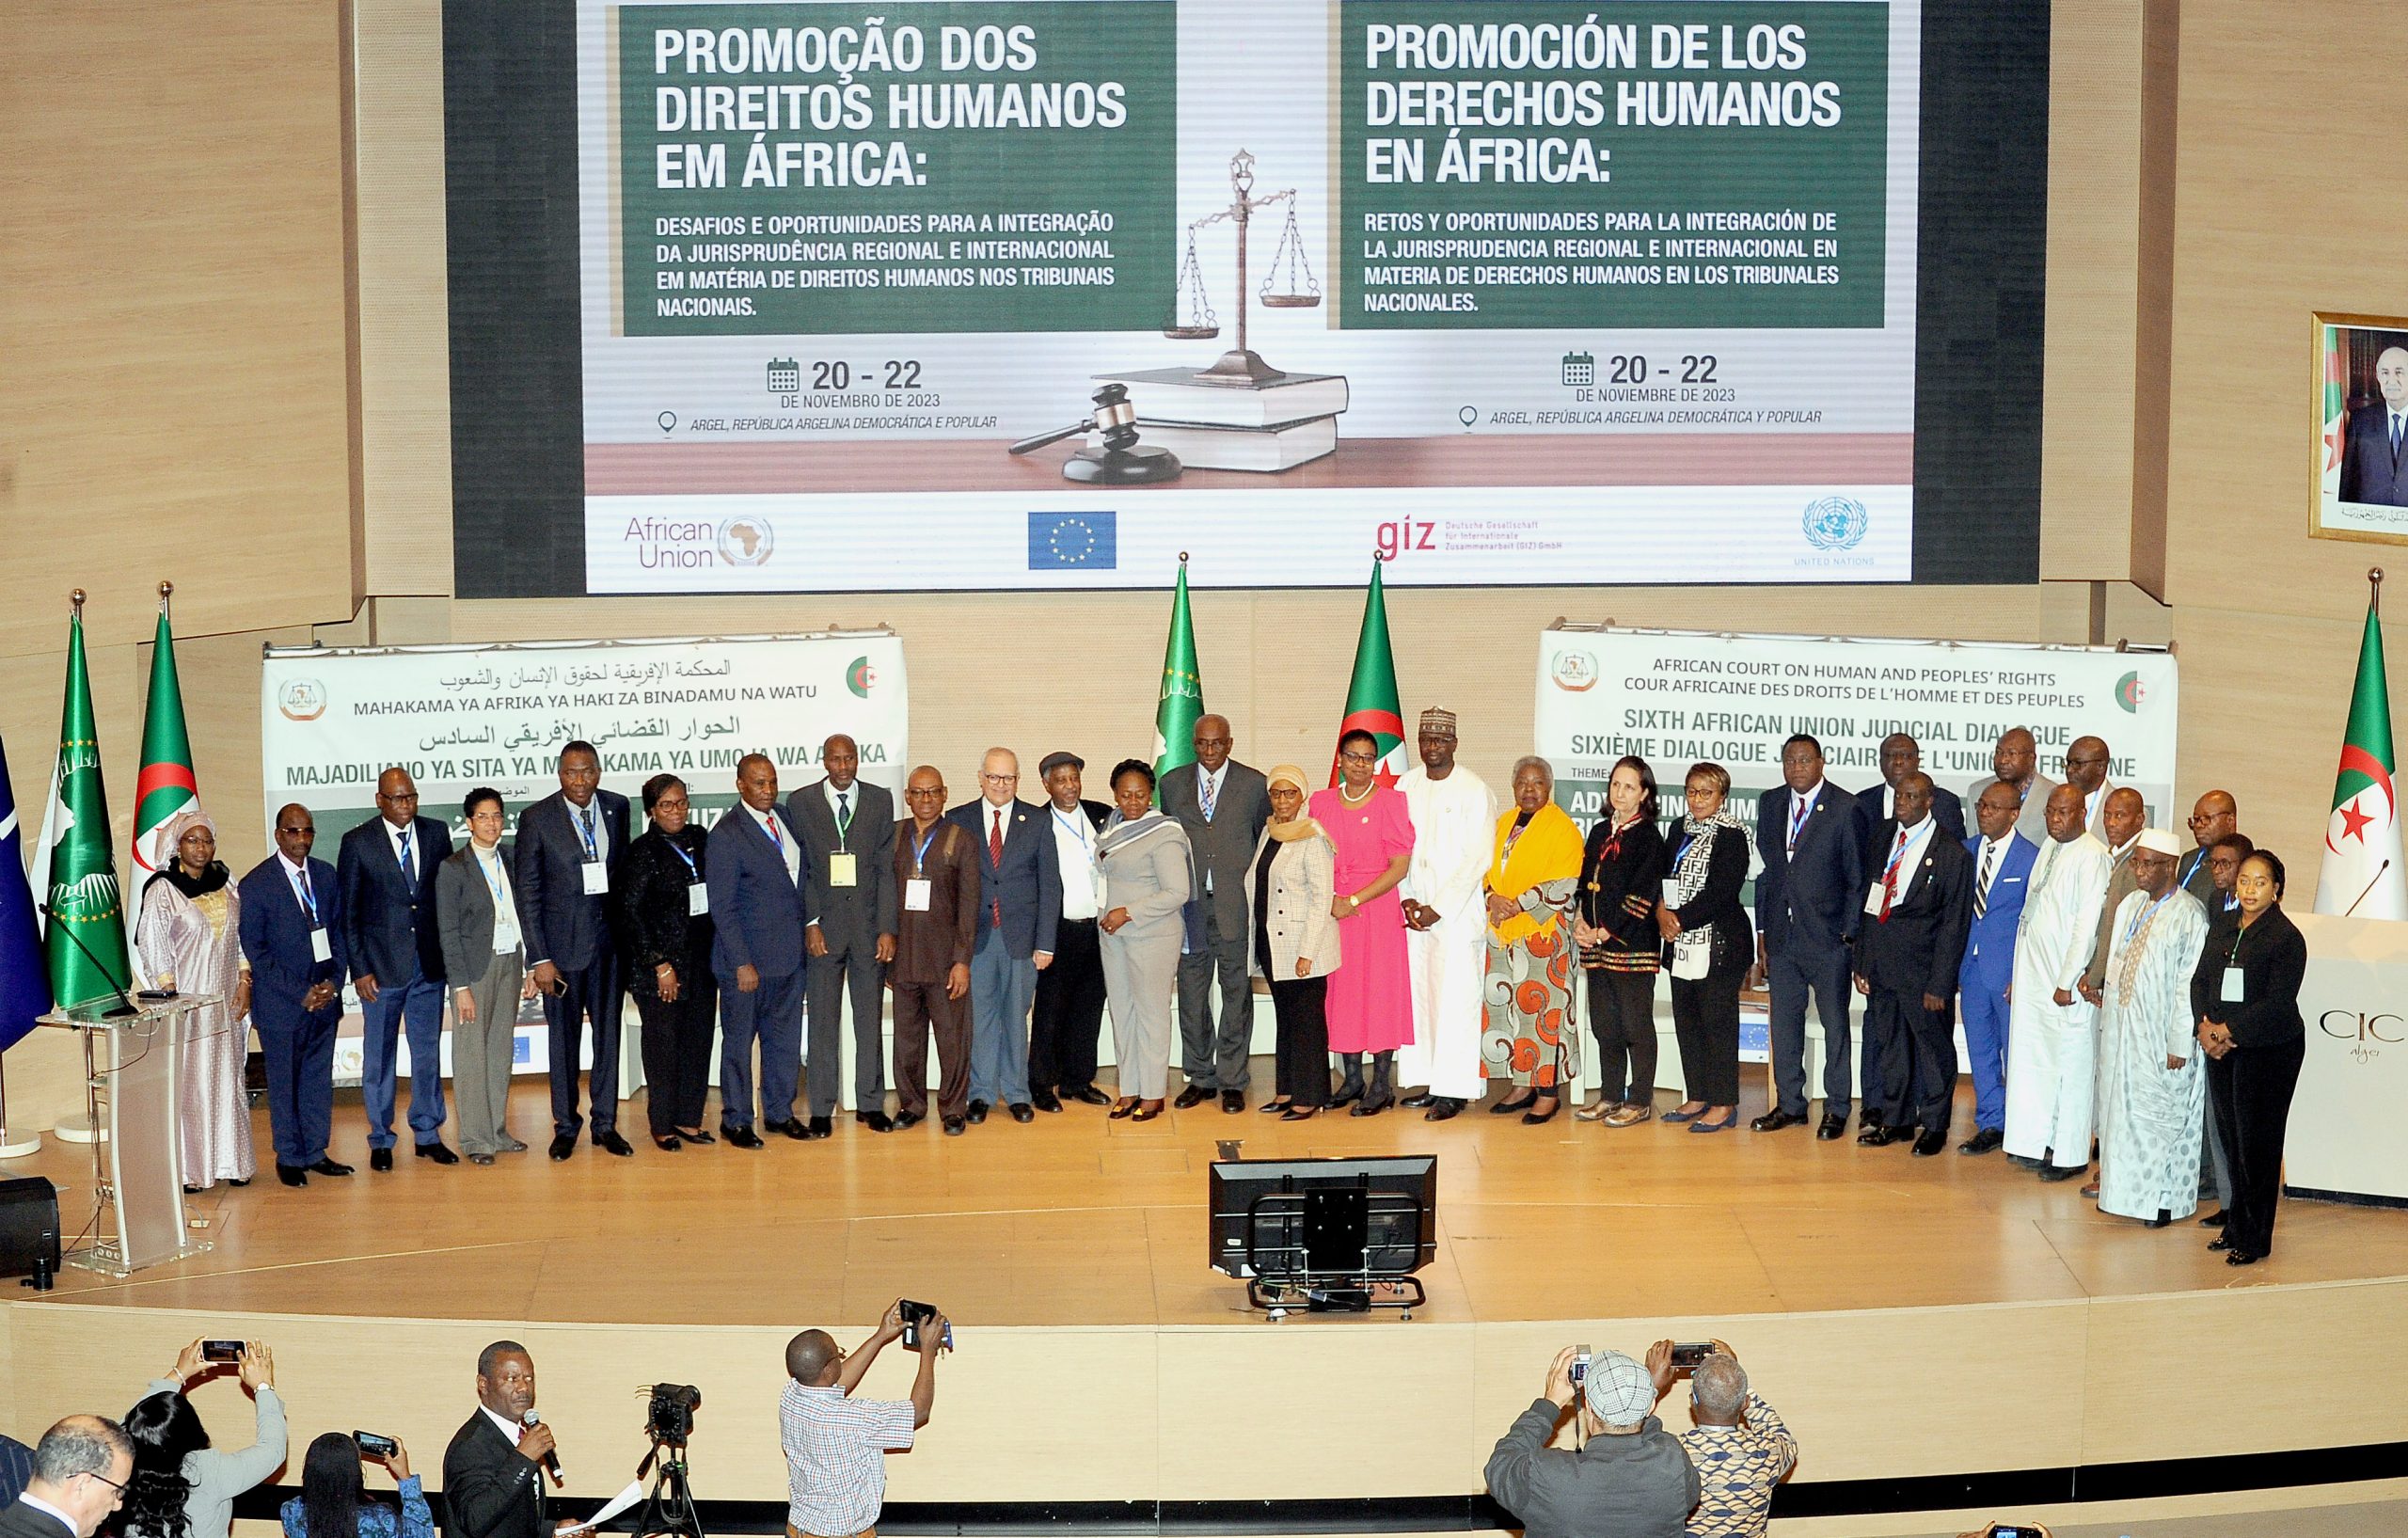 END OF THE SIXTH AFRICAN UNION JUDICIAL DIALOGUE